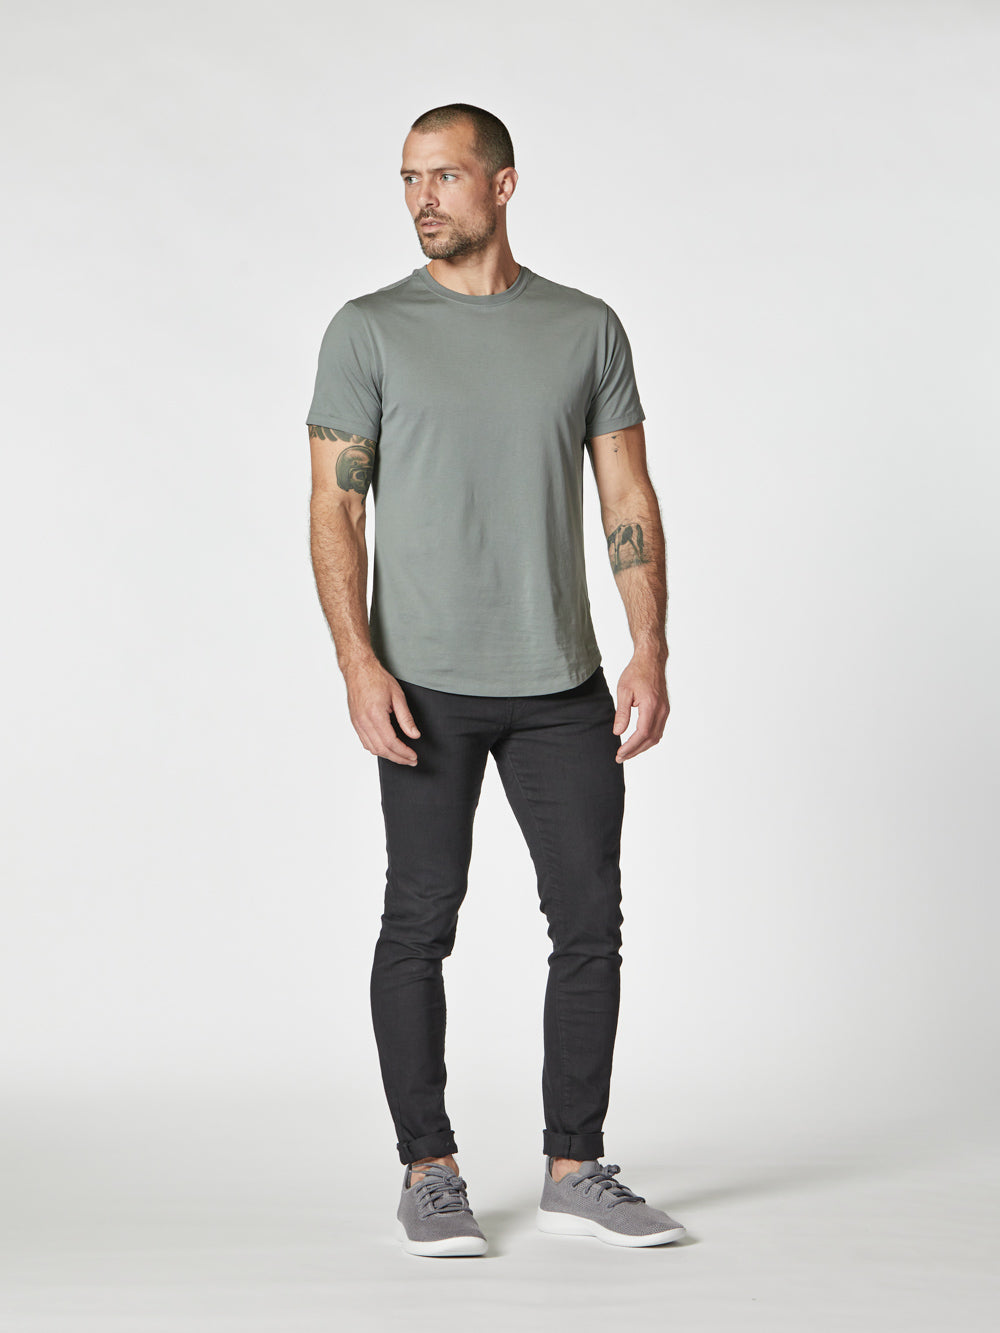 New Stylish Longline Stepped Curved Hem T Shirt Wholesale Manufacturer &  Exporters Textile & Fashion Leather Clothing Goods with we have provide  customization Brand your own